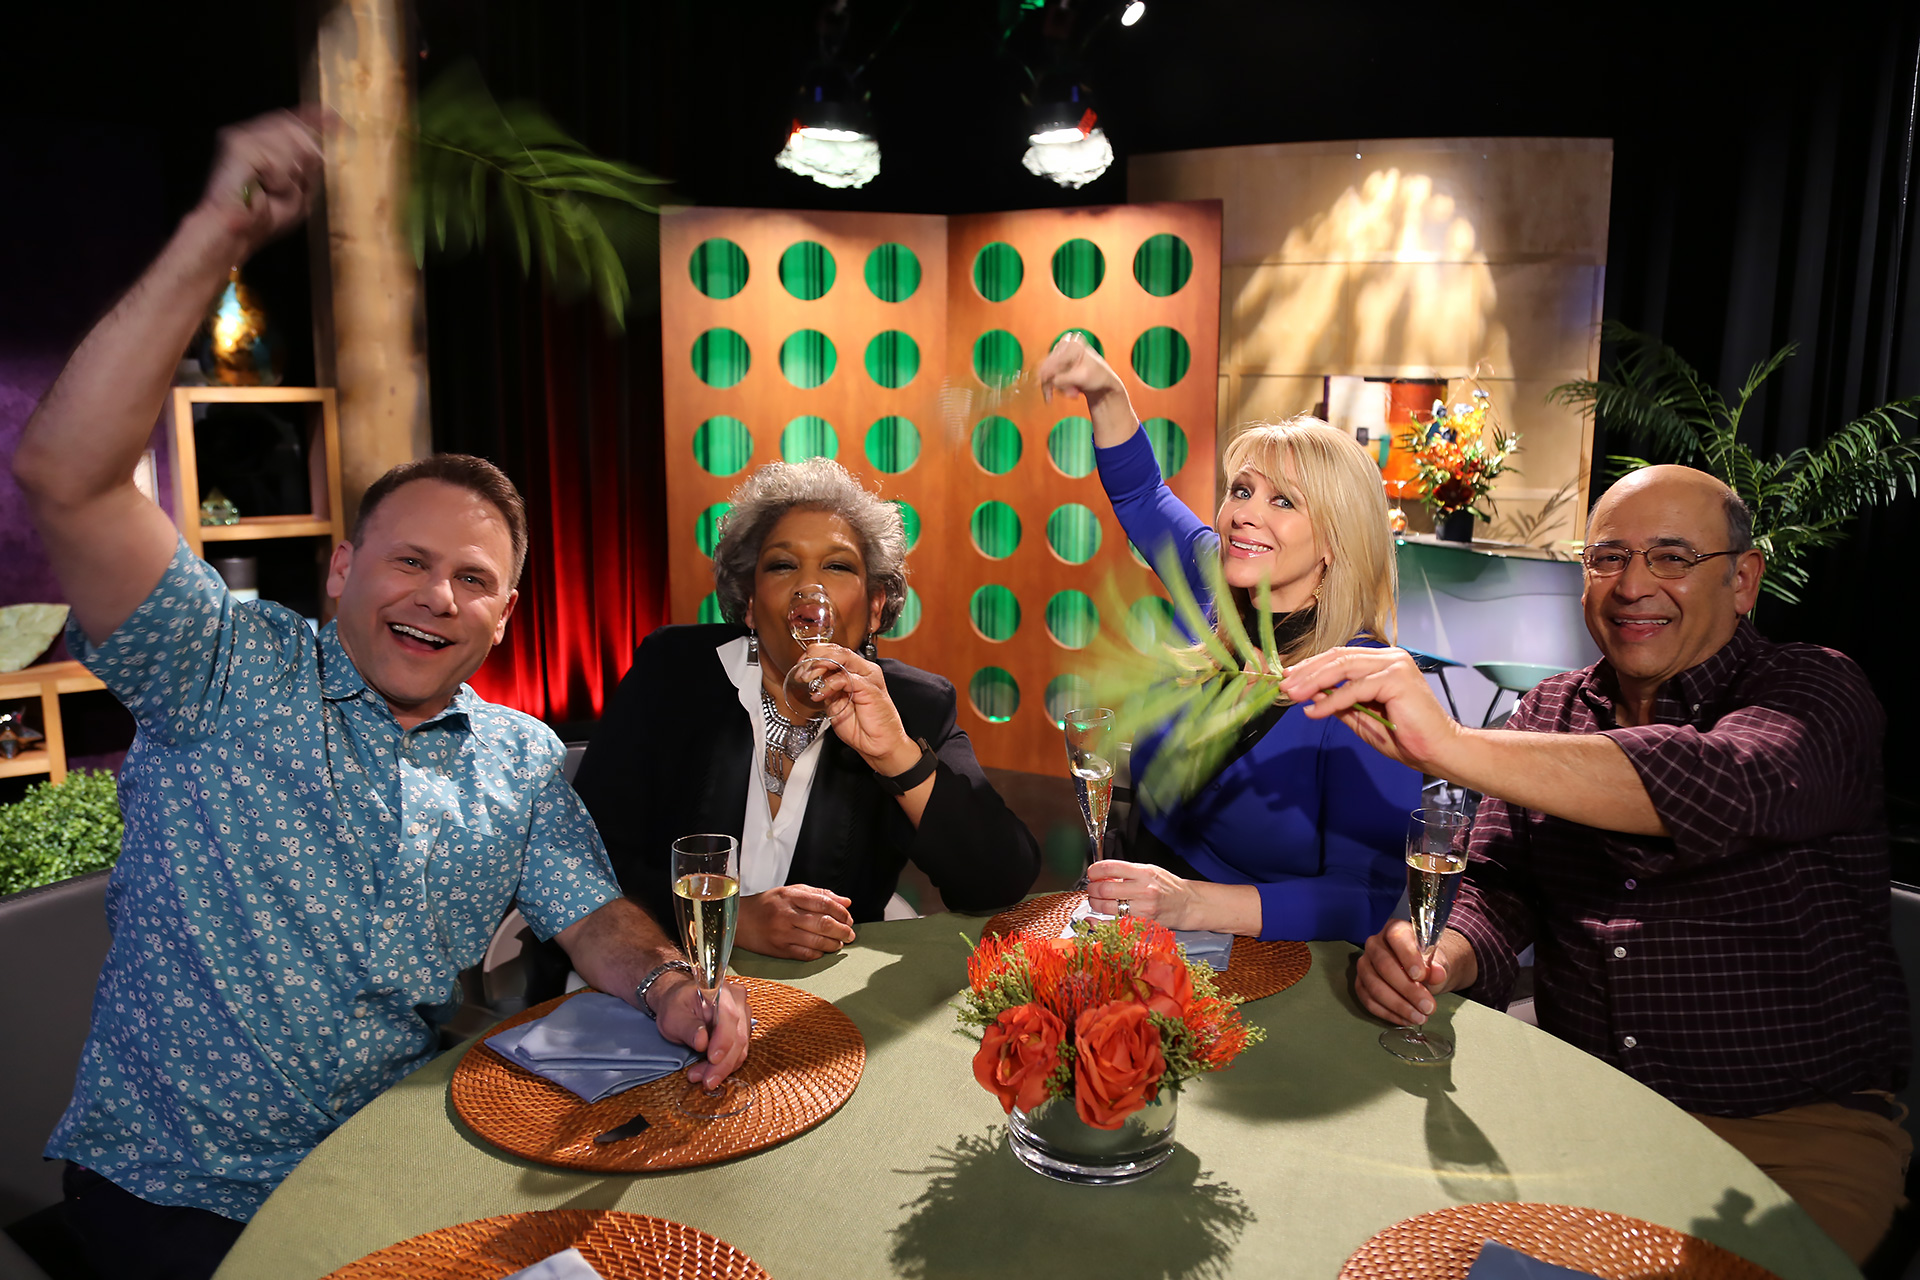 Host Leslie Sbrocco and guests having fun on the set of the premiere episode of season 13.